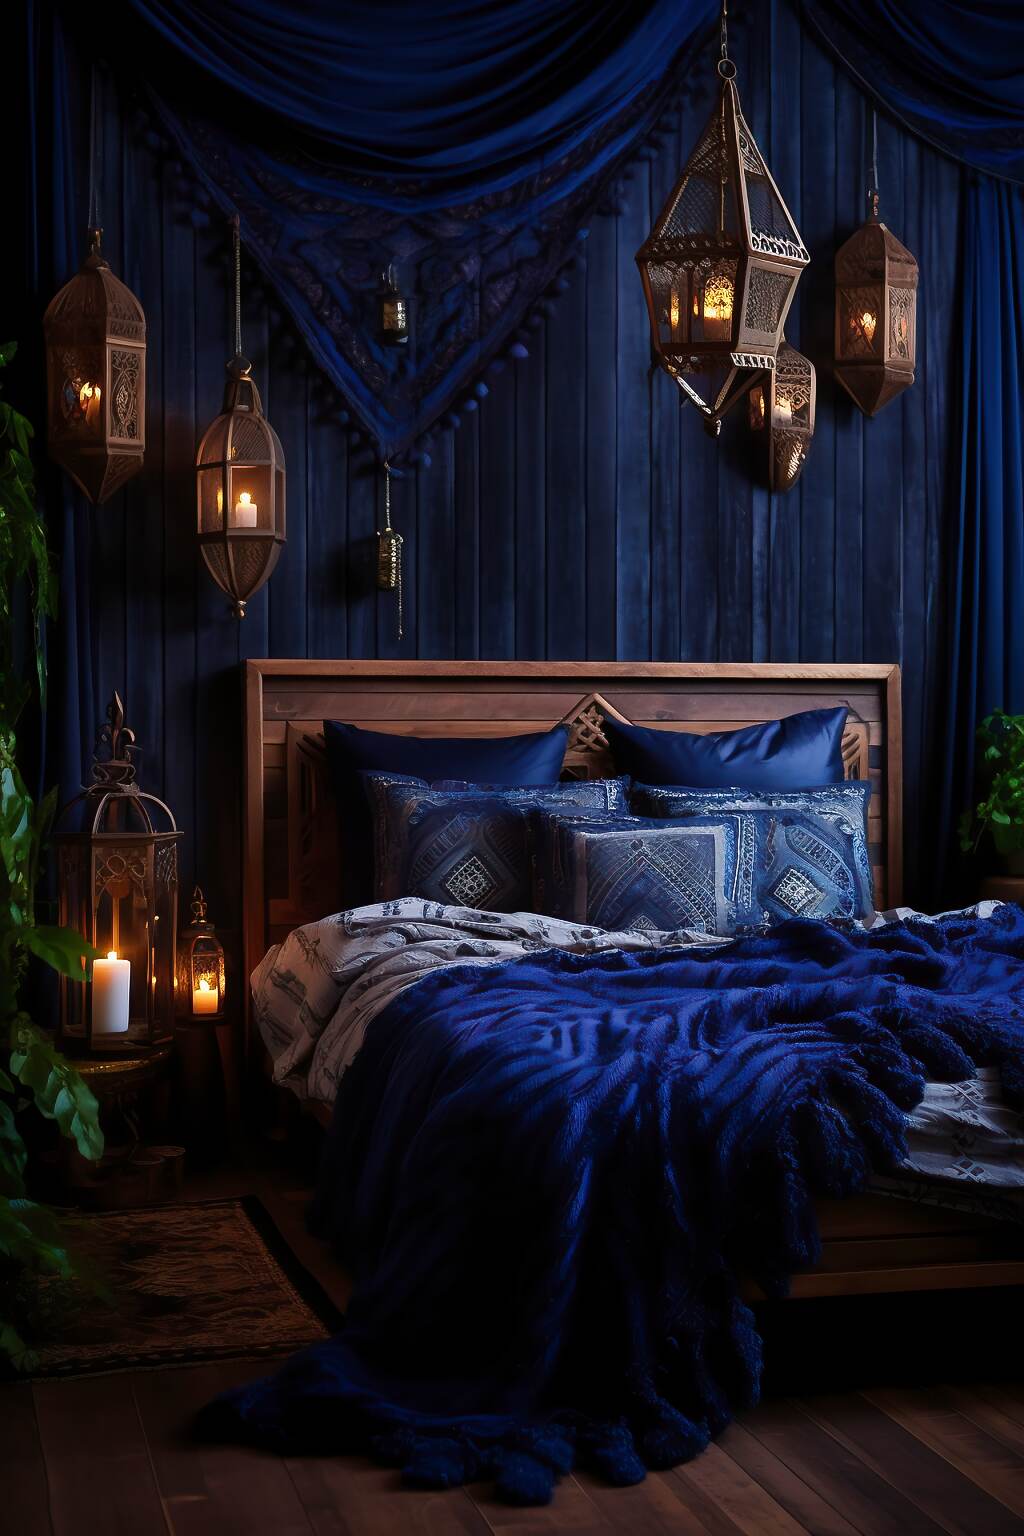 Medium-Sized Dark Boho Bedroom With A Blue &Amp; Black Color Scheme, Featuring Vintage Lanterns, Macramé Wall Hanging, And Distressed Wood Furniture, Creating A Mysterious And Enchanting Atmosphere.